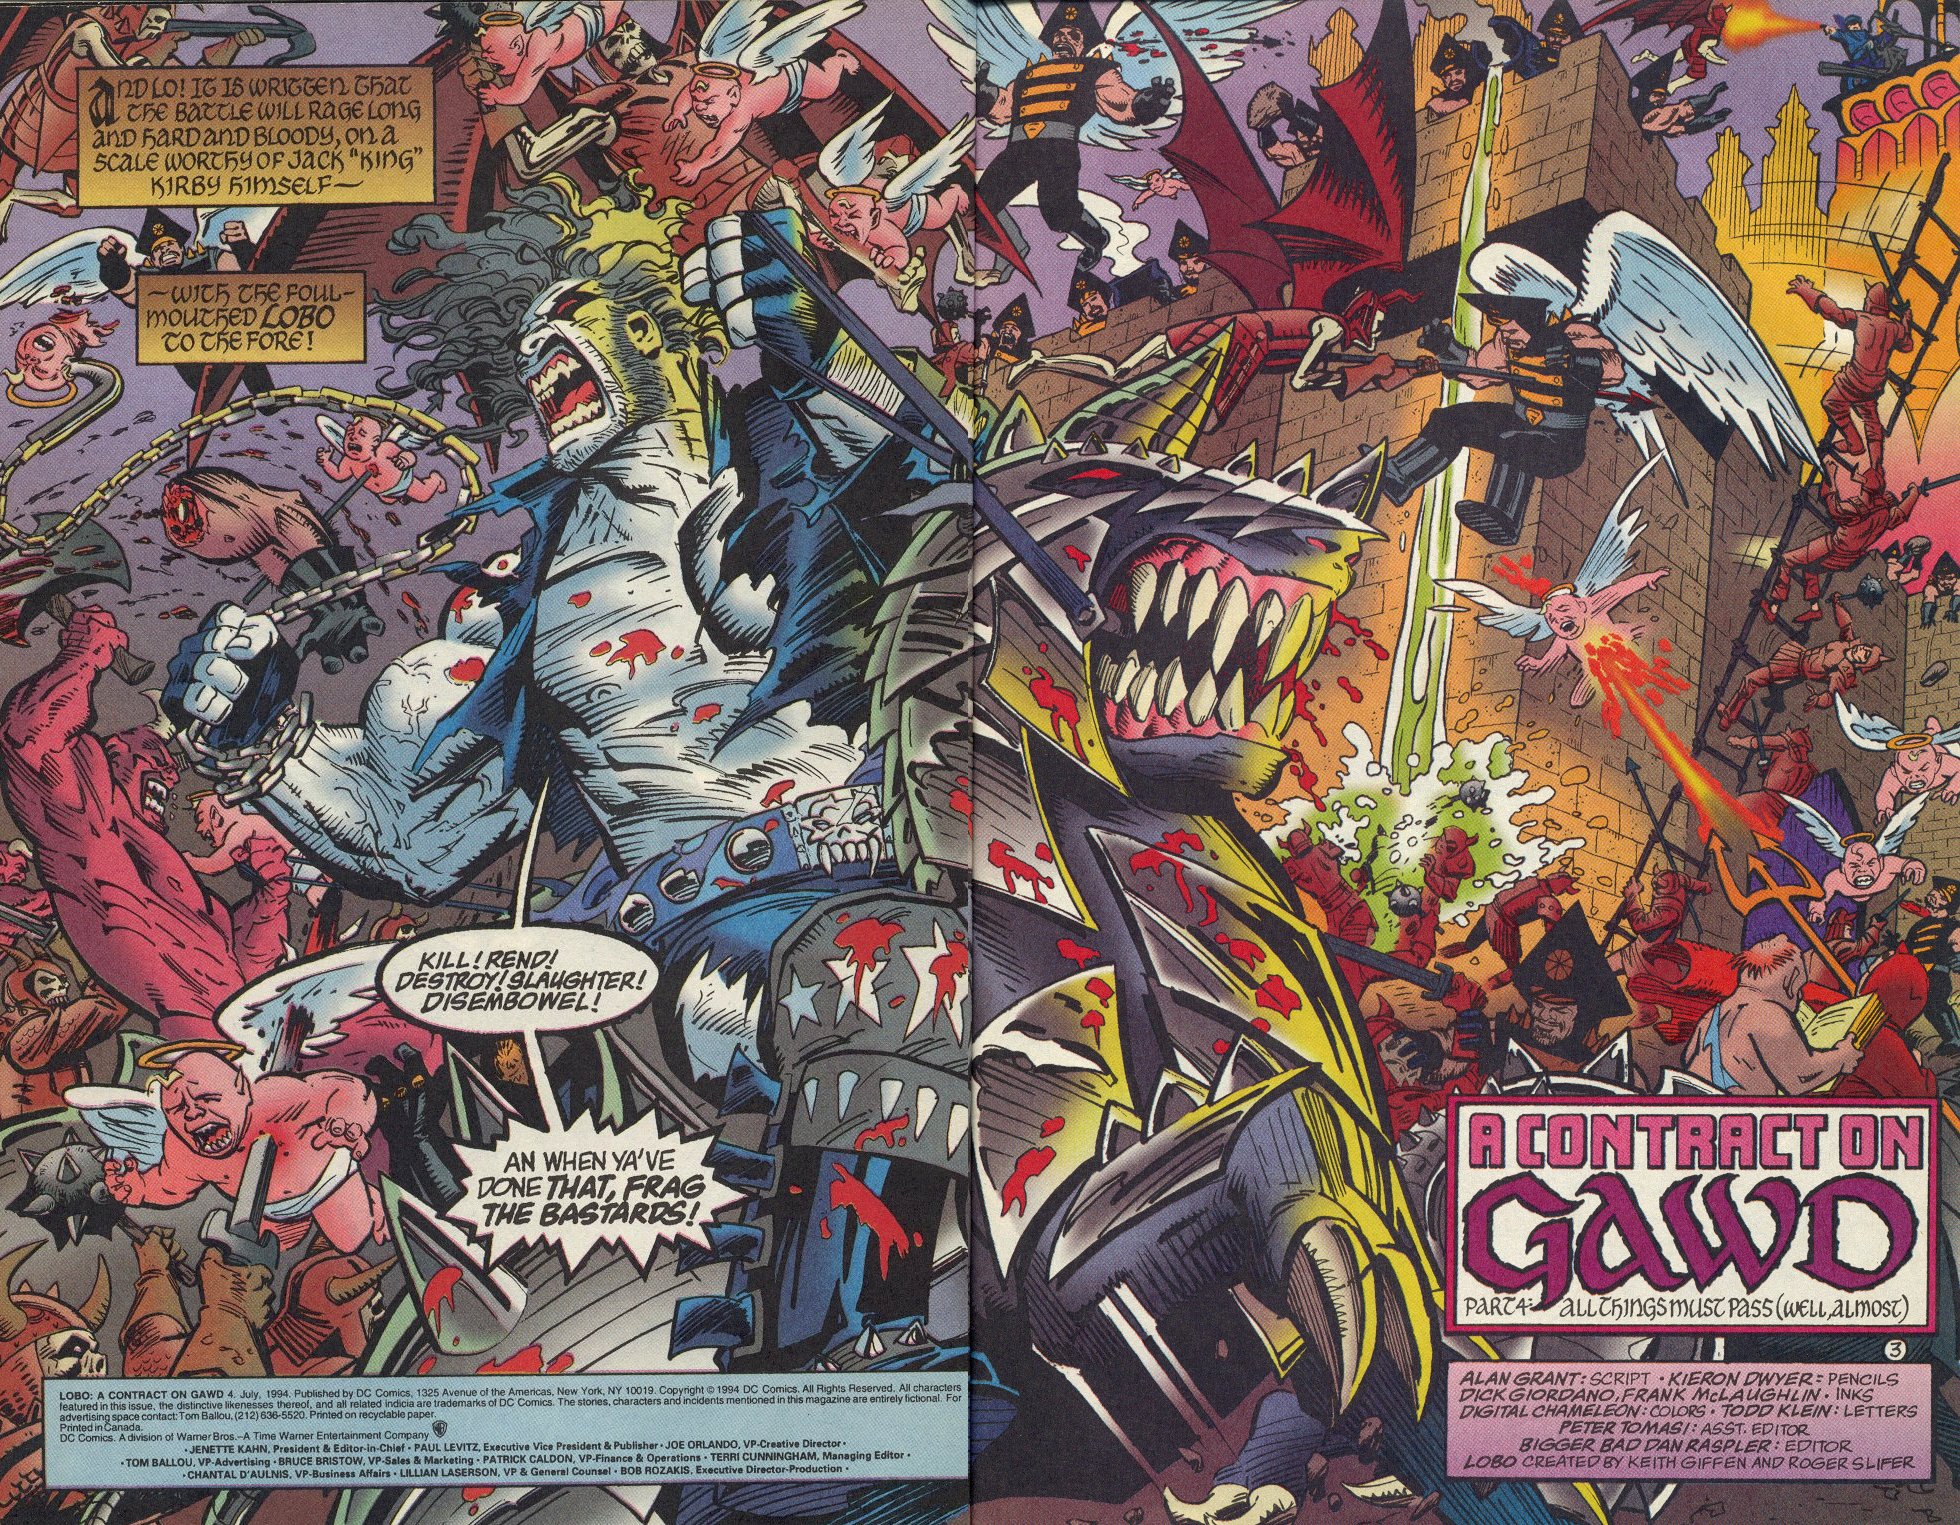 Read online Lobo: A Contract on Gawd comic -  Issue #4 - 3